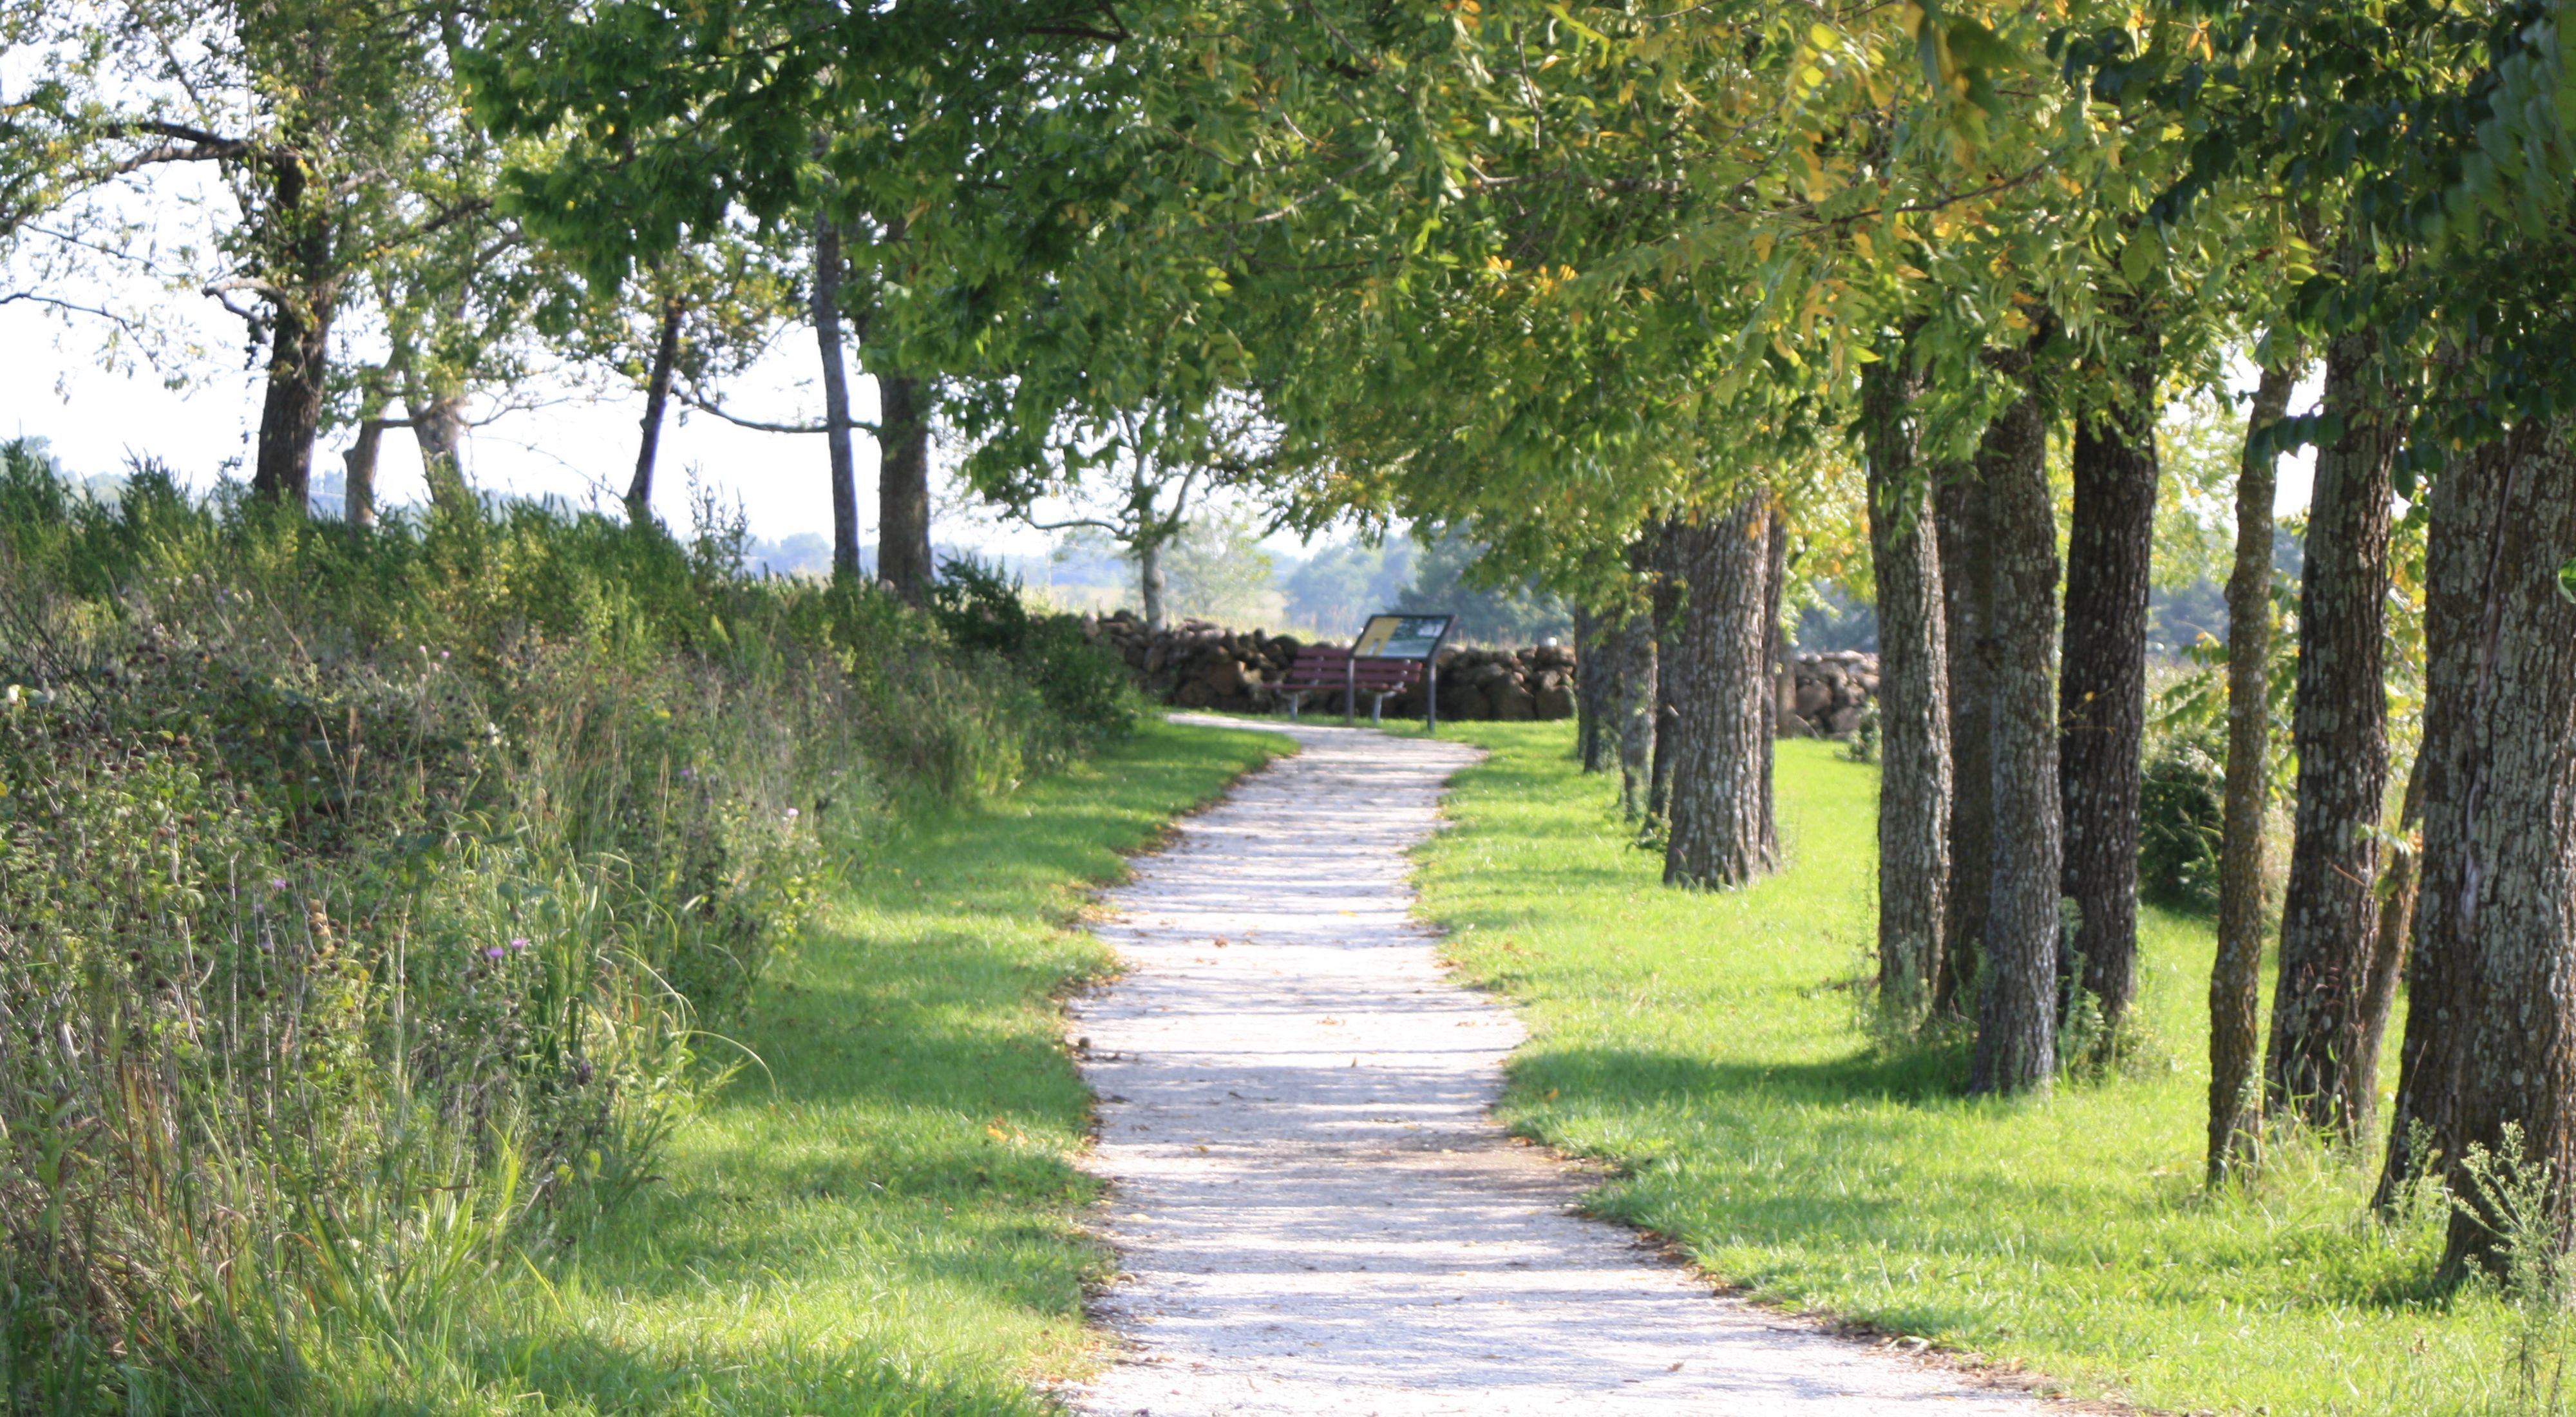 A paved path snakes through a grove of trees and tallgrass prairie at George Washington Carver National Monument in Missouri.